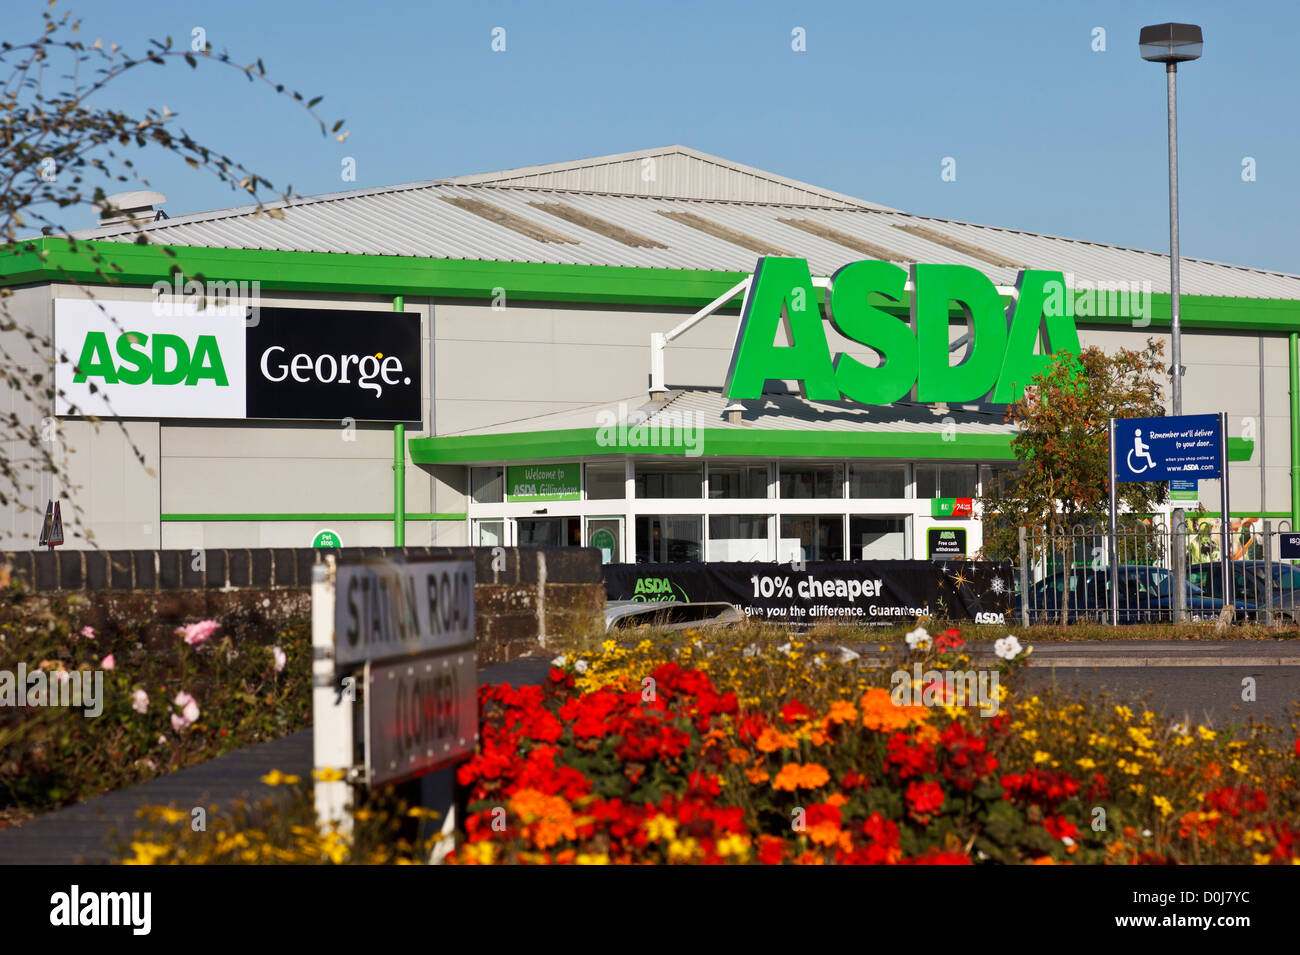 Front aspect of an ASDA retail supermarket in Dorset. Stock Photo